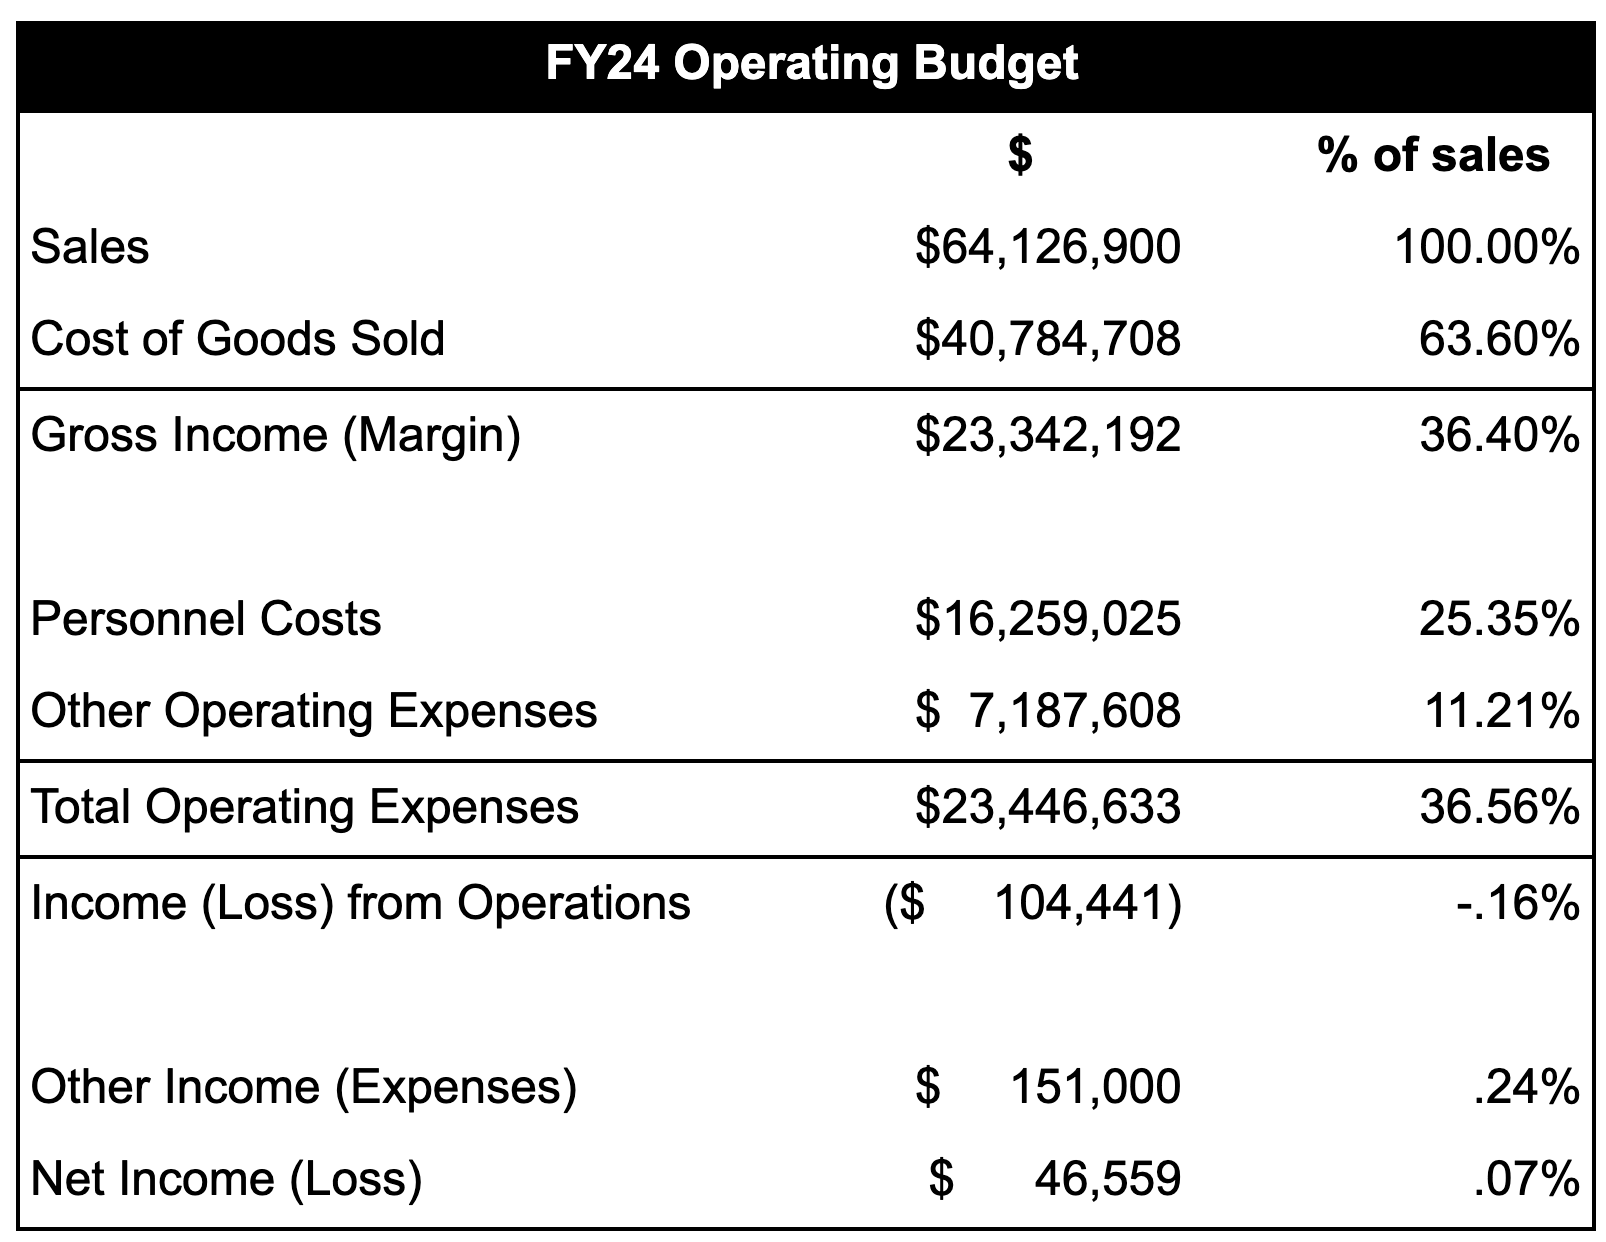 FY24 Operating Budget